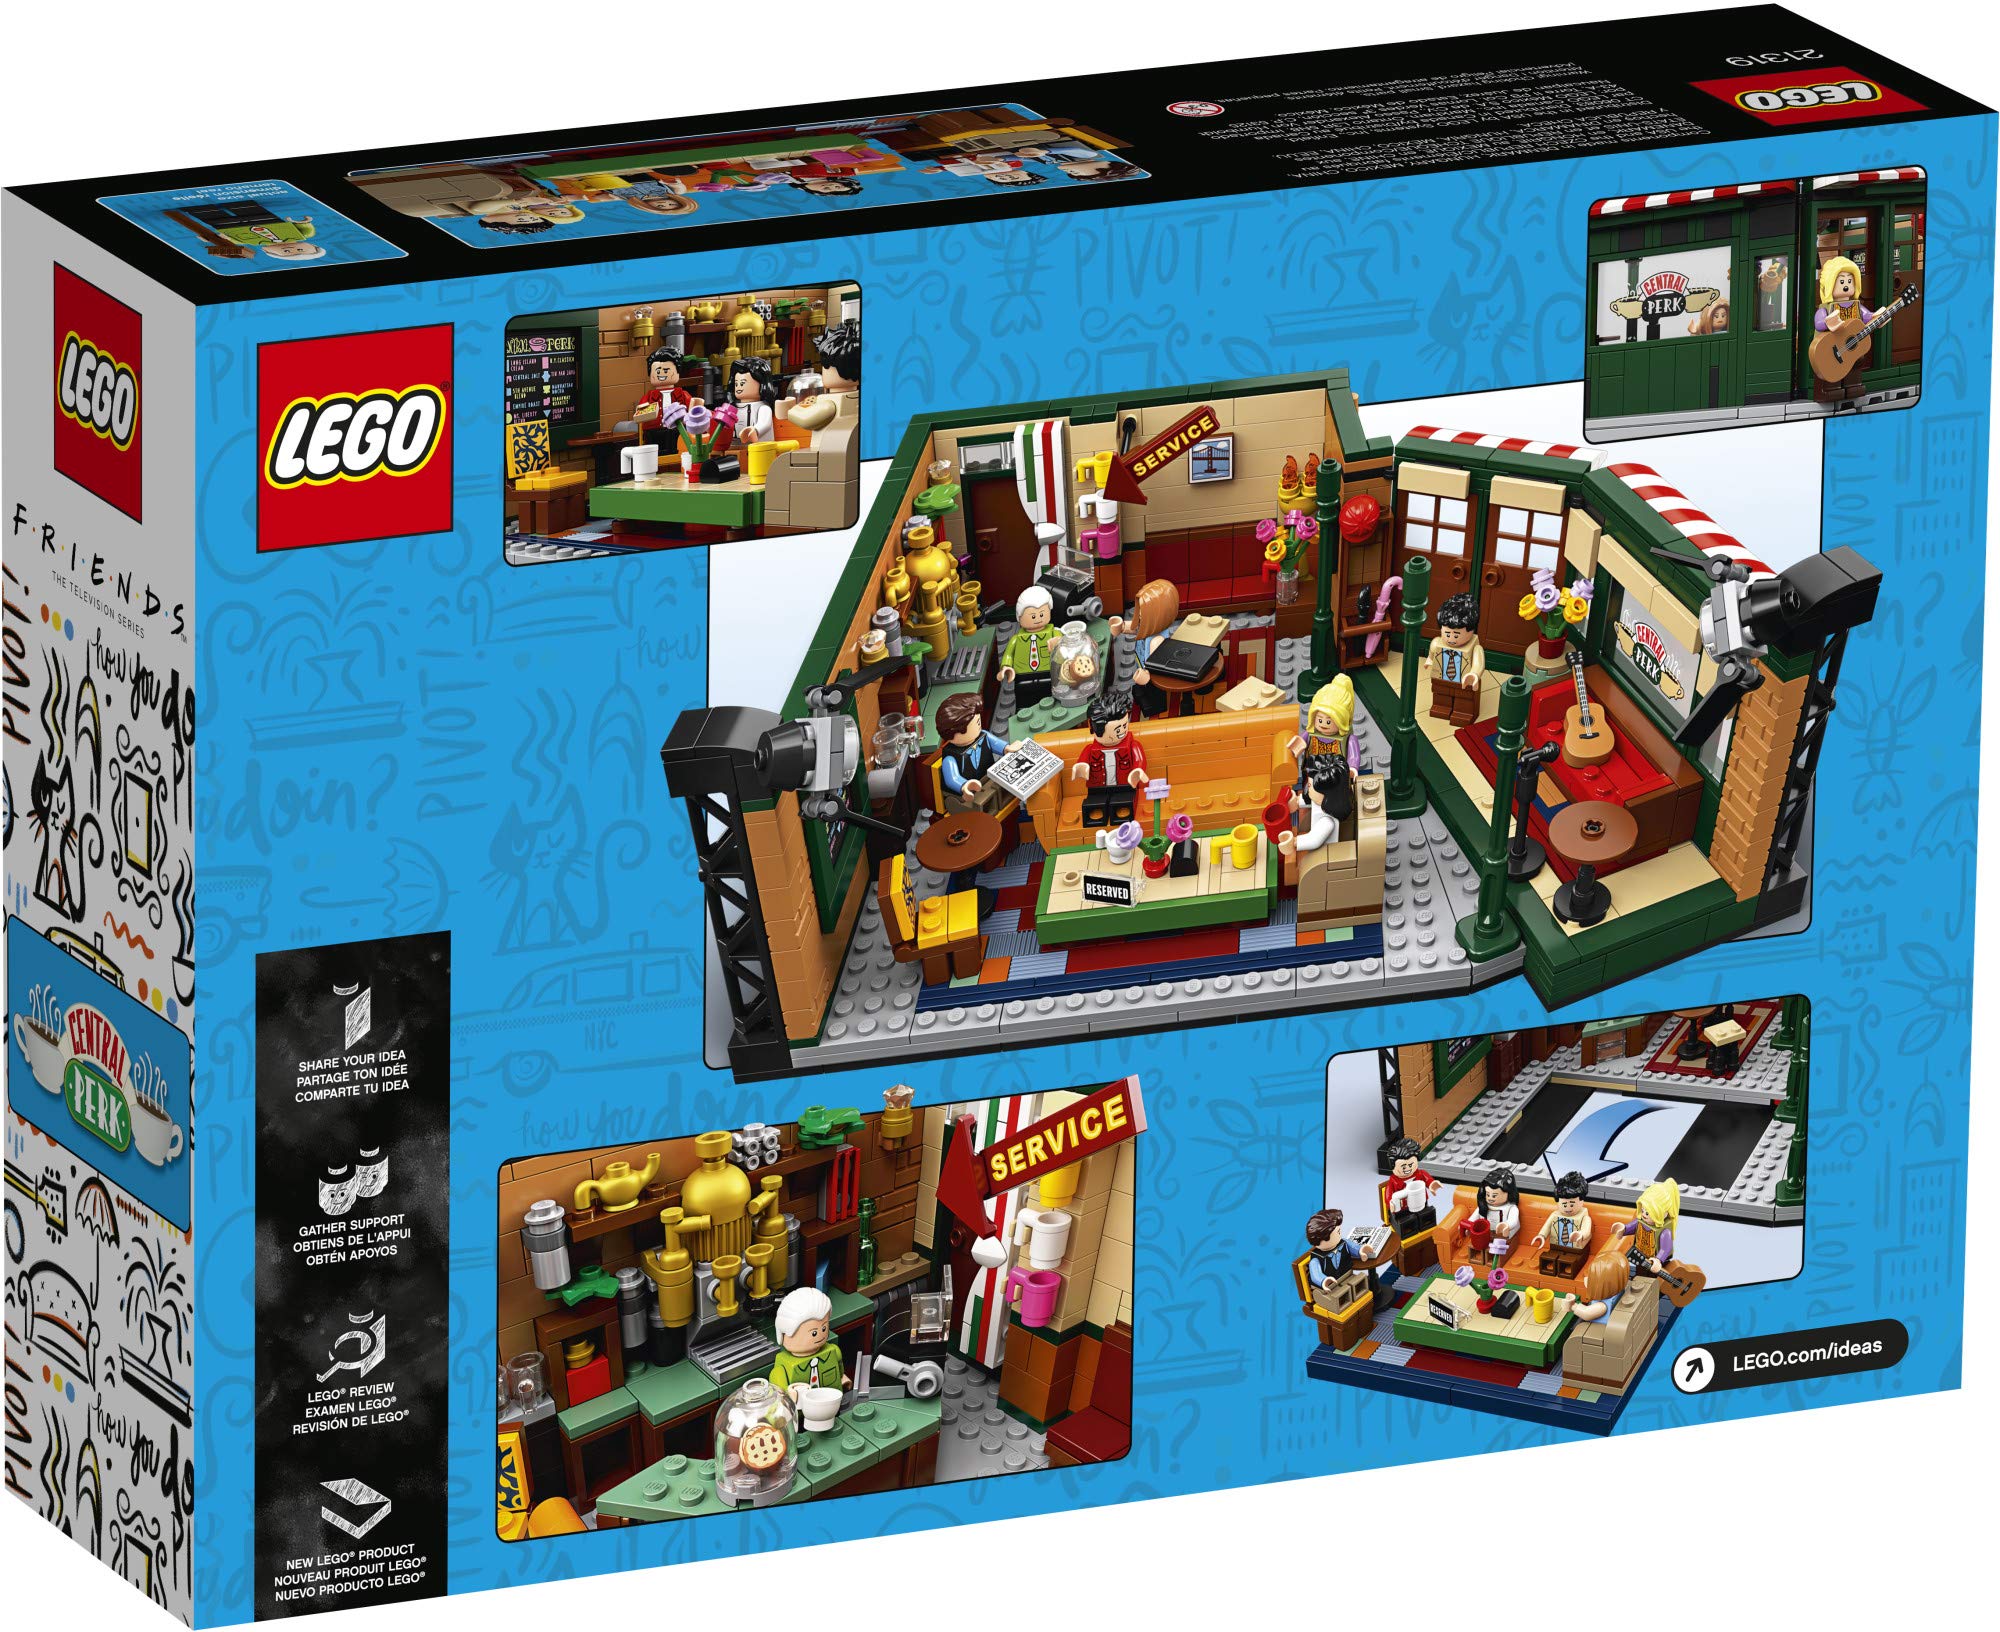 LEGO Ideas 21319 Central PERK Building Kit (1,070 Pieces) (Like New, Open Box)